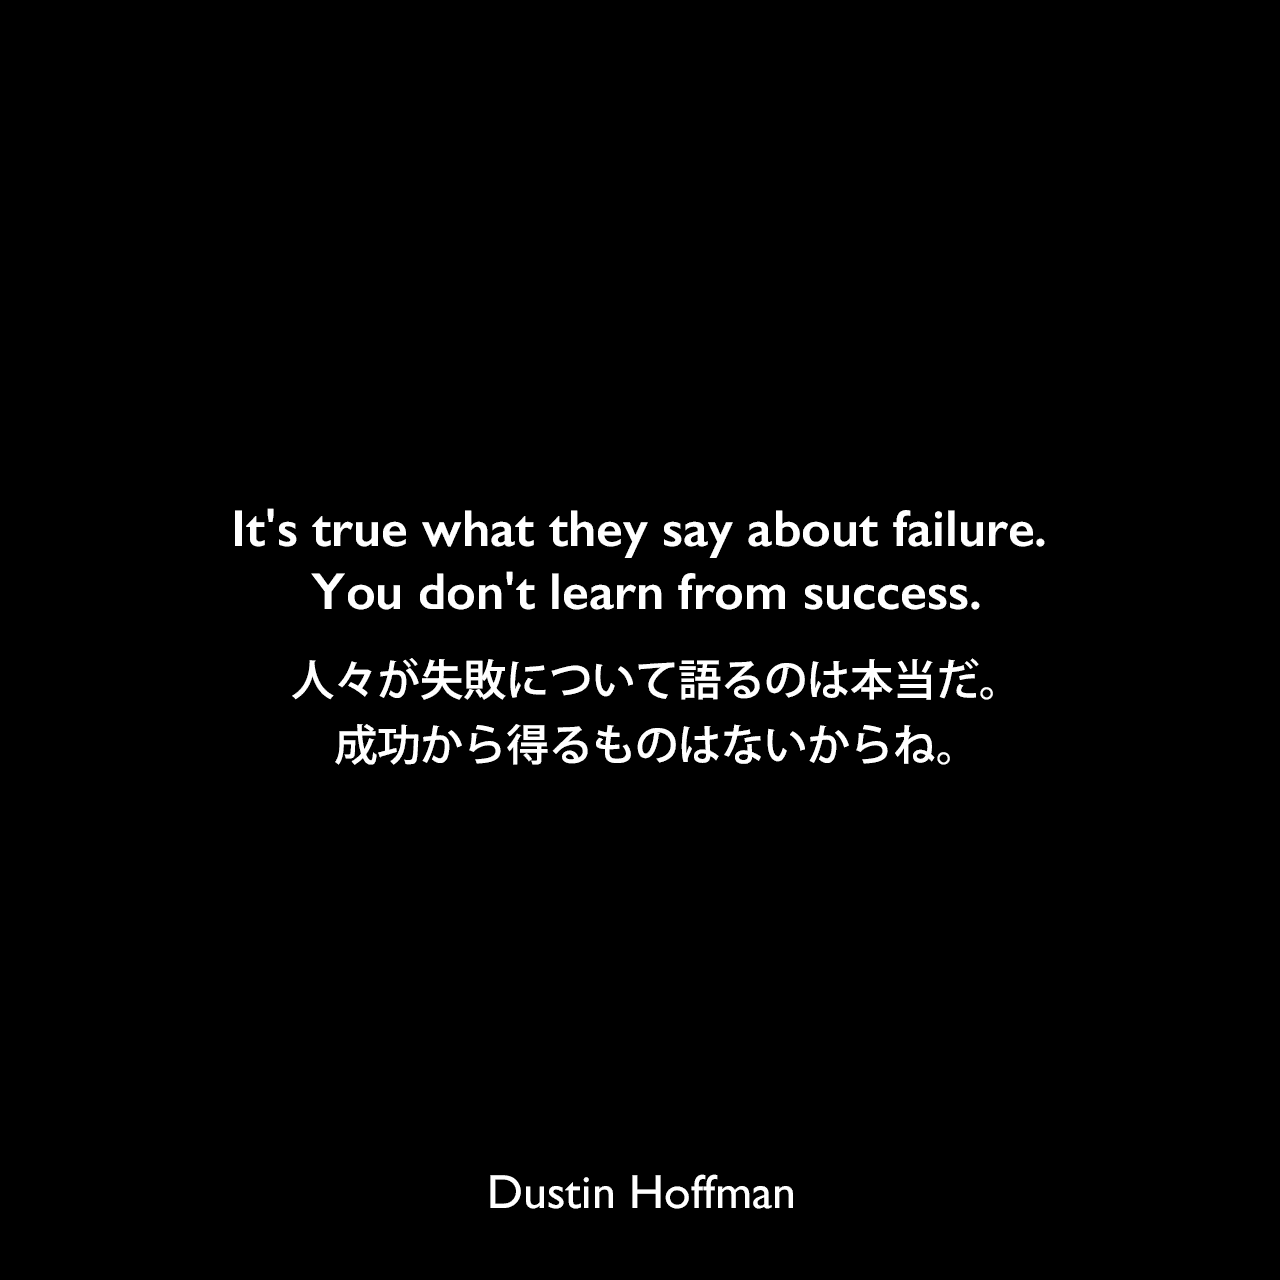 It's true what they say about failure. You don't learn from success.人々が失敗について語るのは本当だ。成功から得るものはないからね。Dustin Hoffman